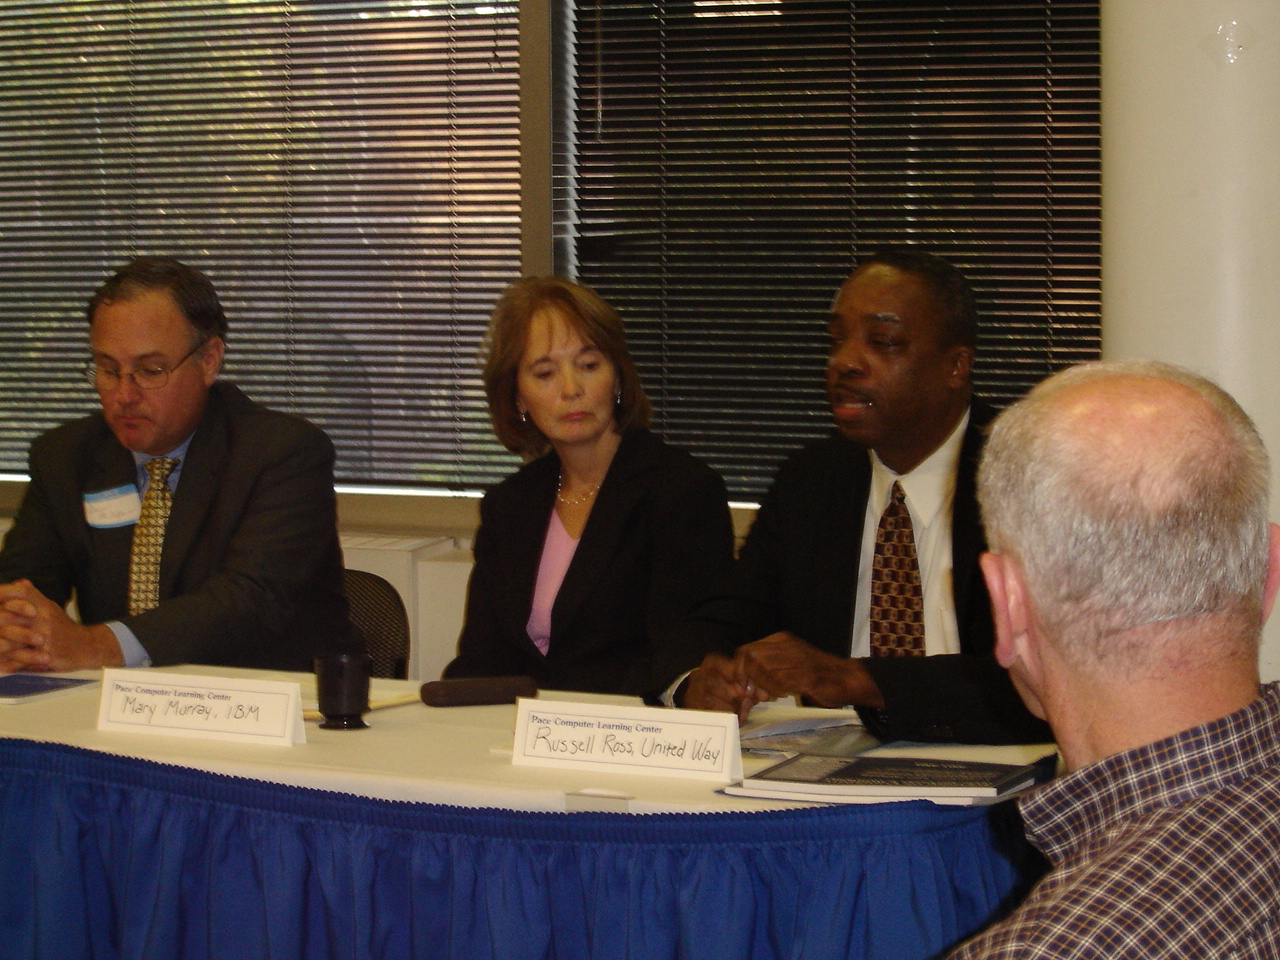 Panel - Russell Ross Jr., United Way Westchester and Putnam